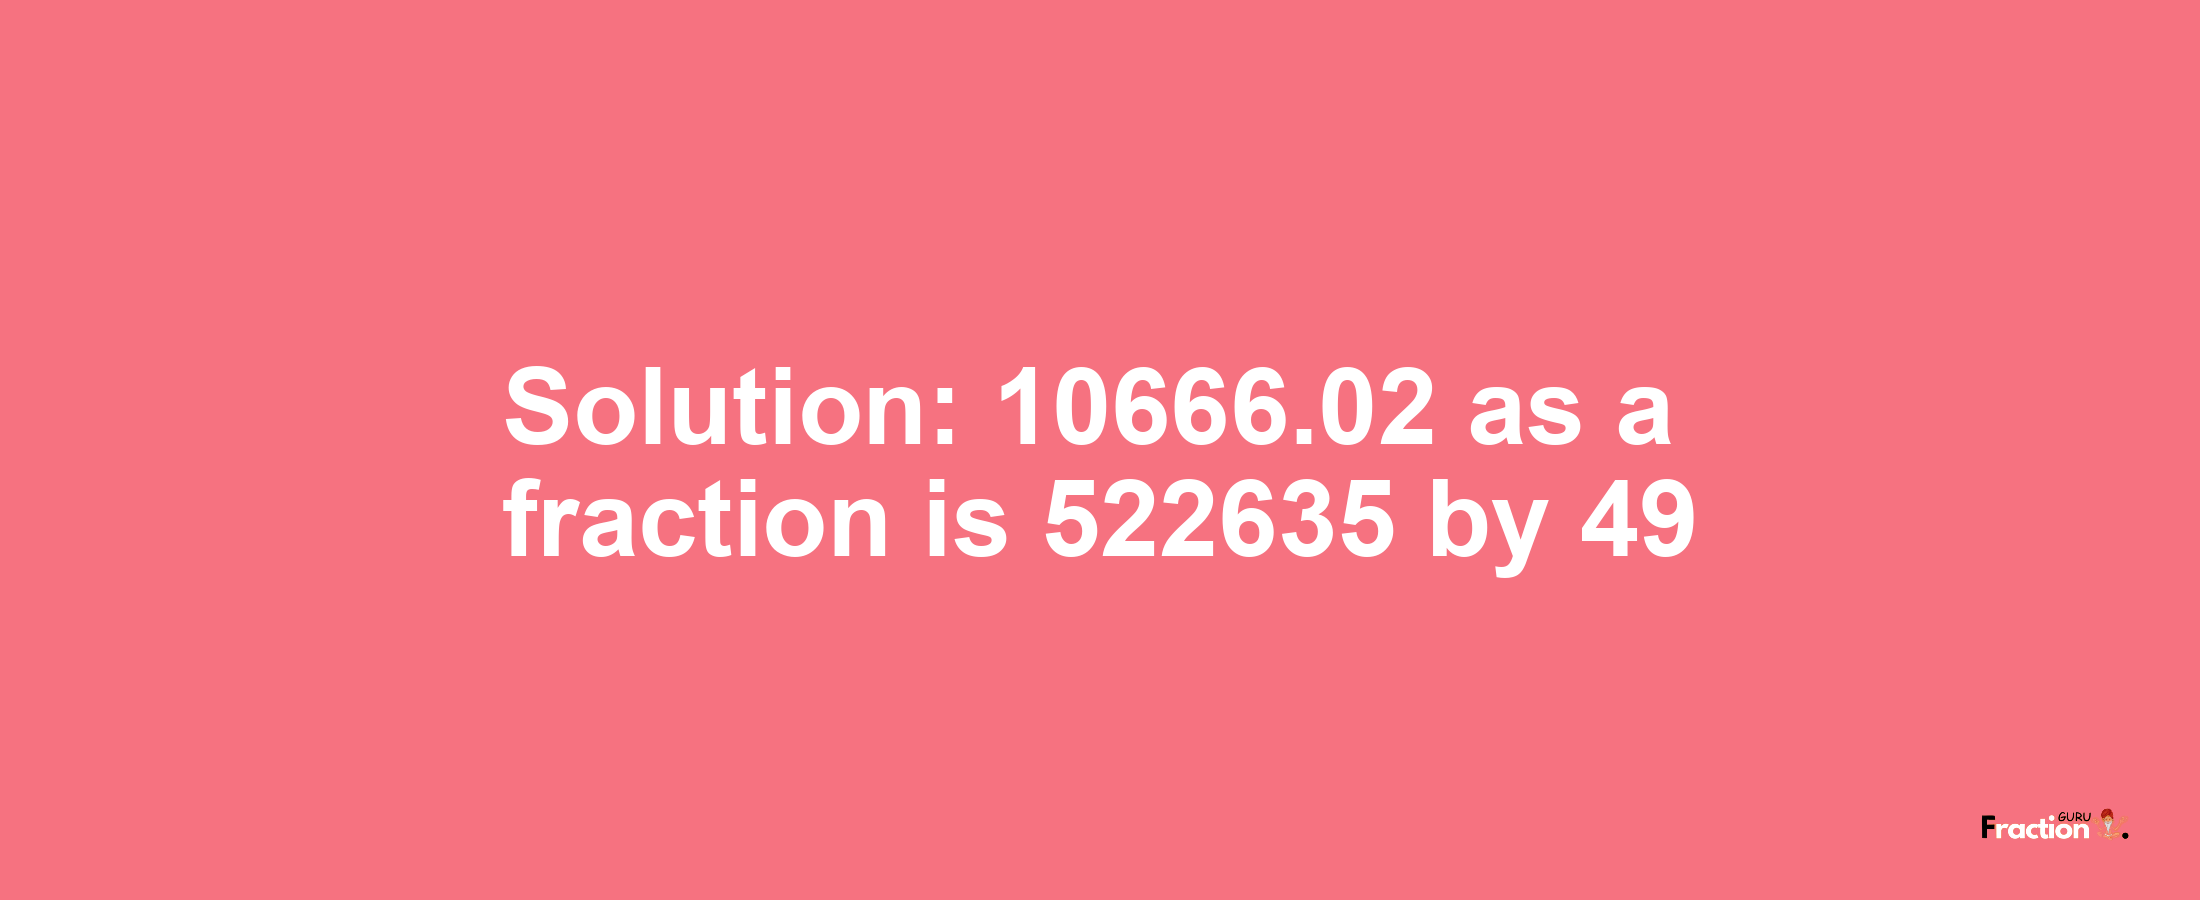 Solution:10666.02 as a fraction is 522635/49